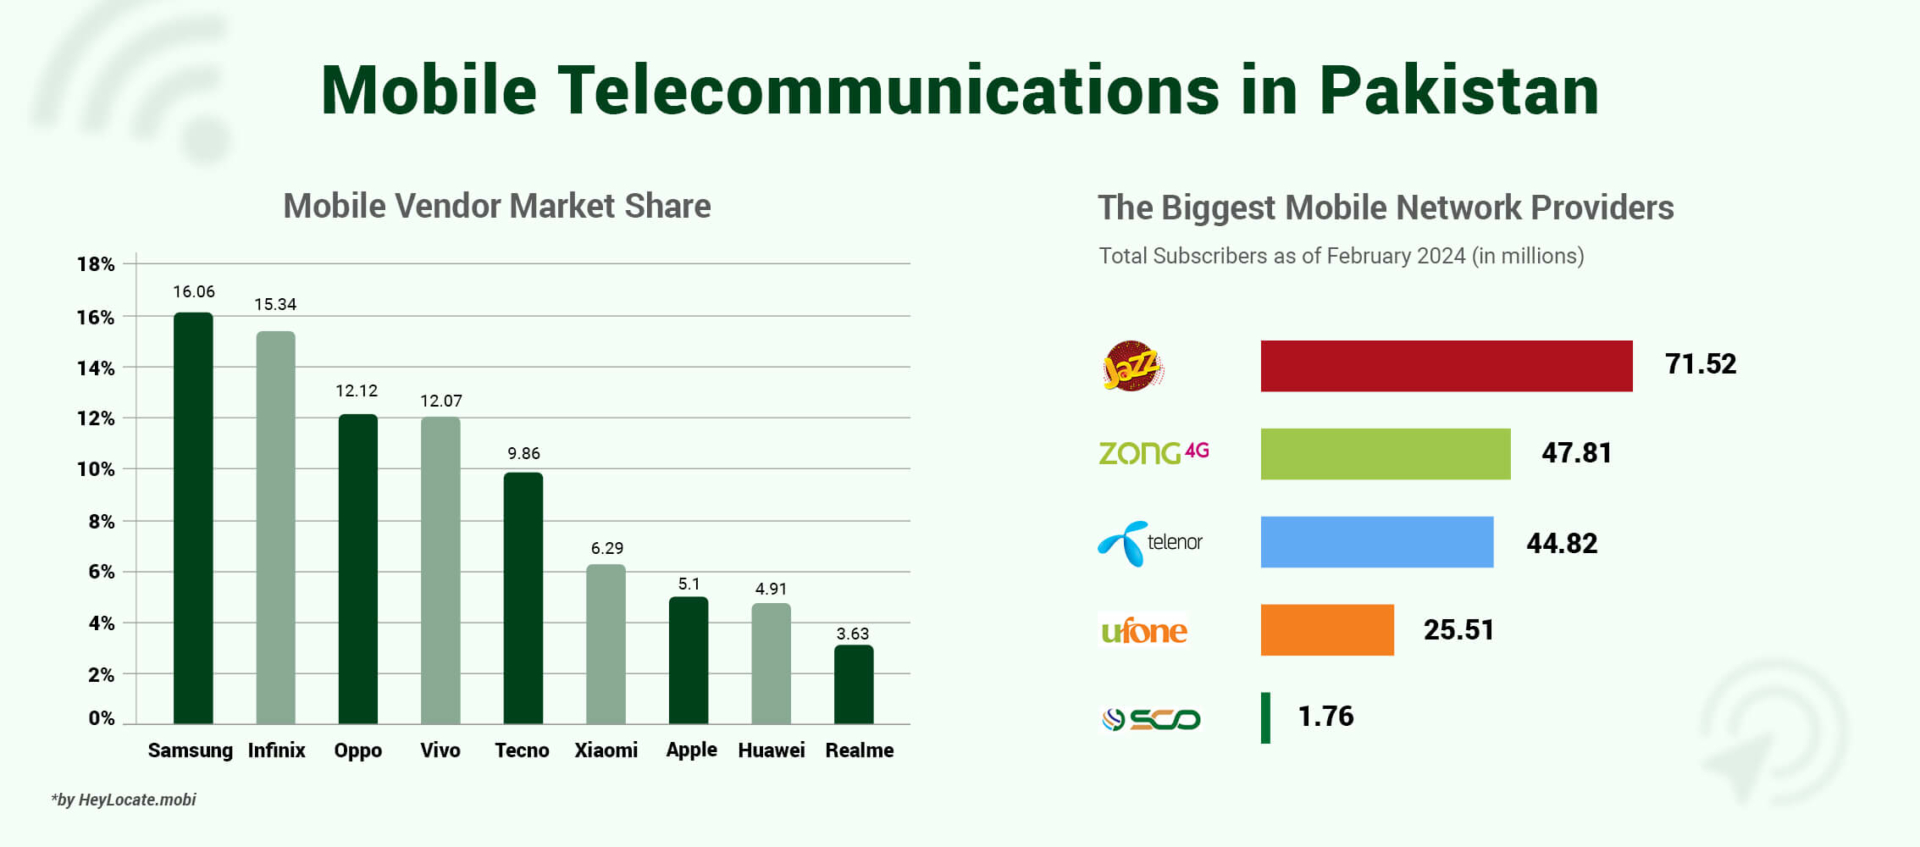 Infographics about mobile telecommunications in Pakistan that shows mobile vendor market share and the biggest mobile network providers 